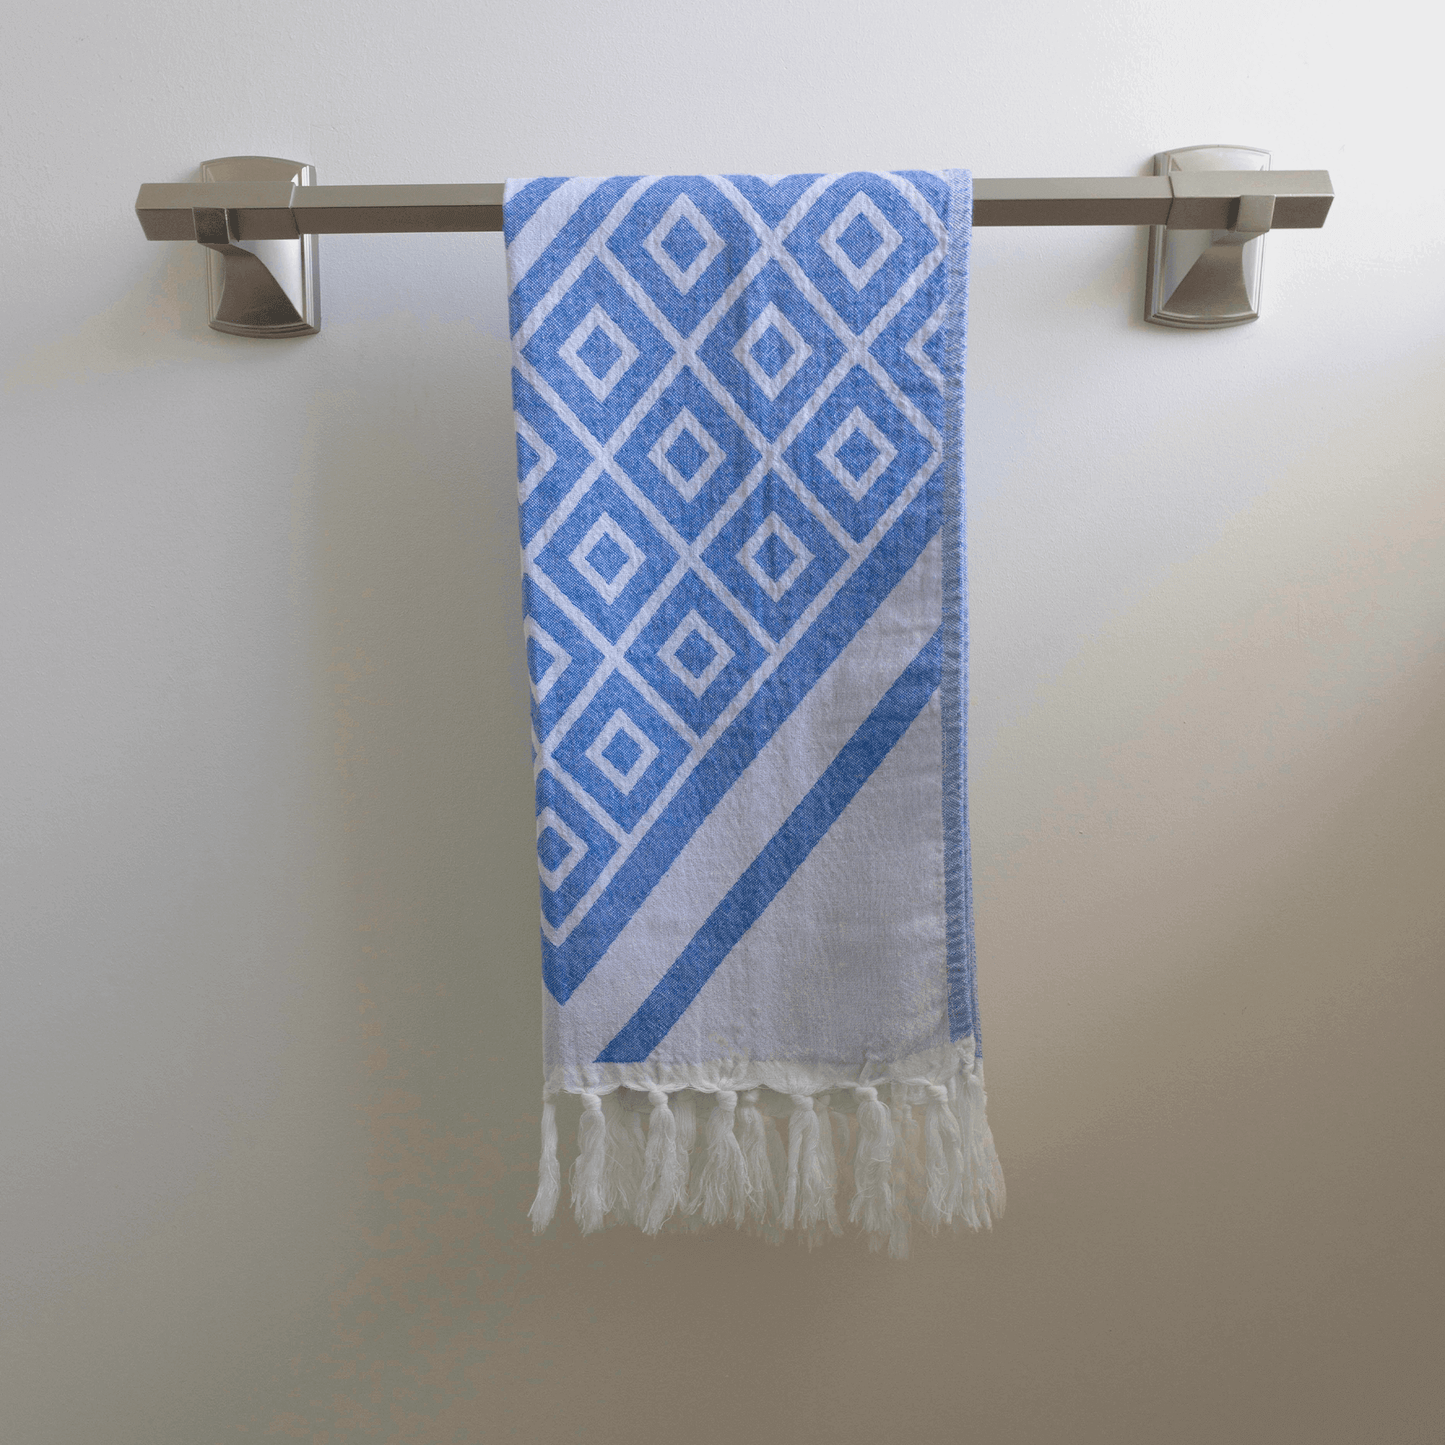 Blue and white hand Turkish Towel hanging on the towel rack